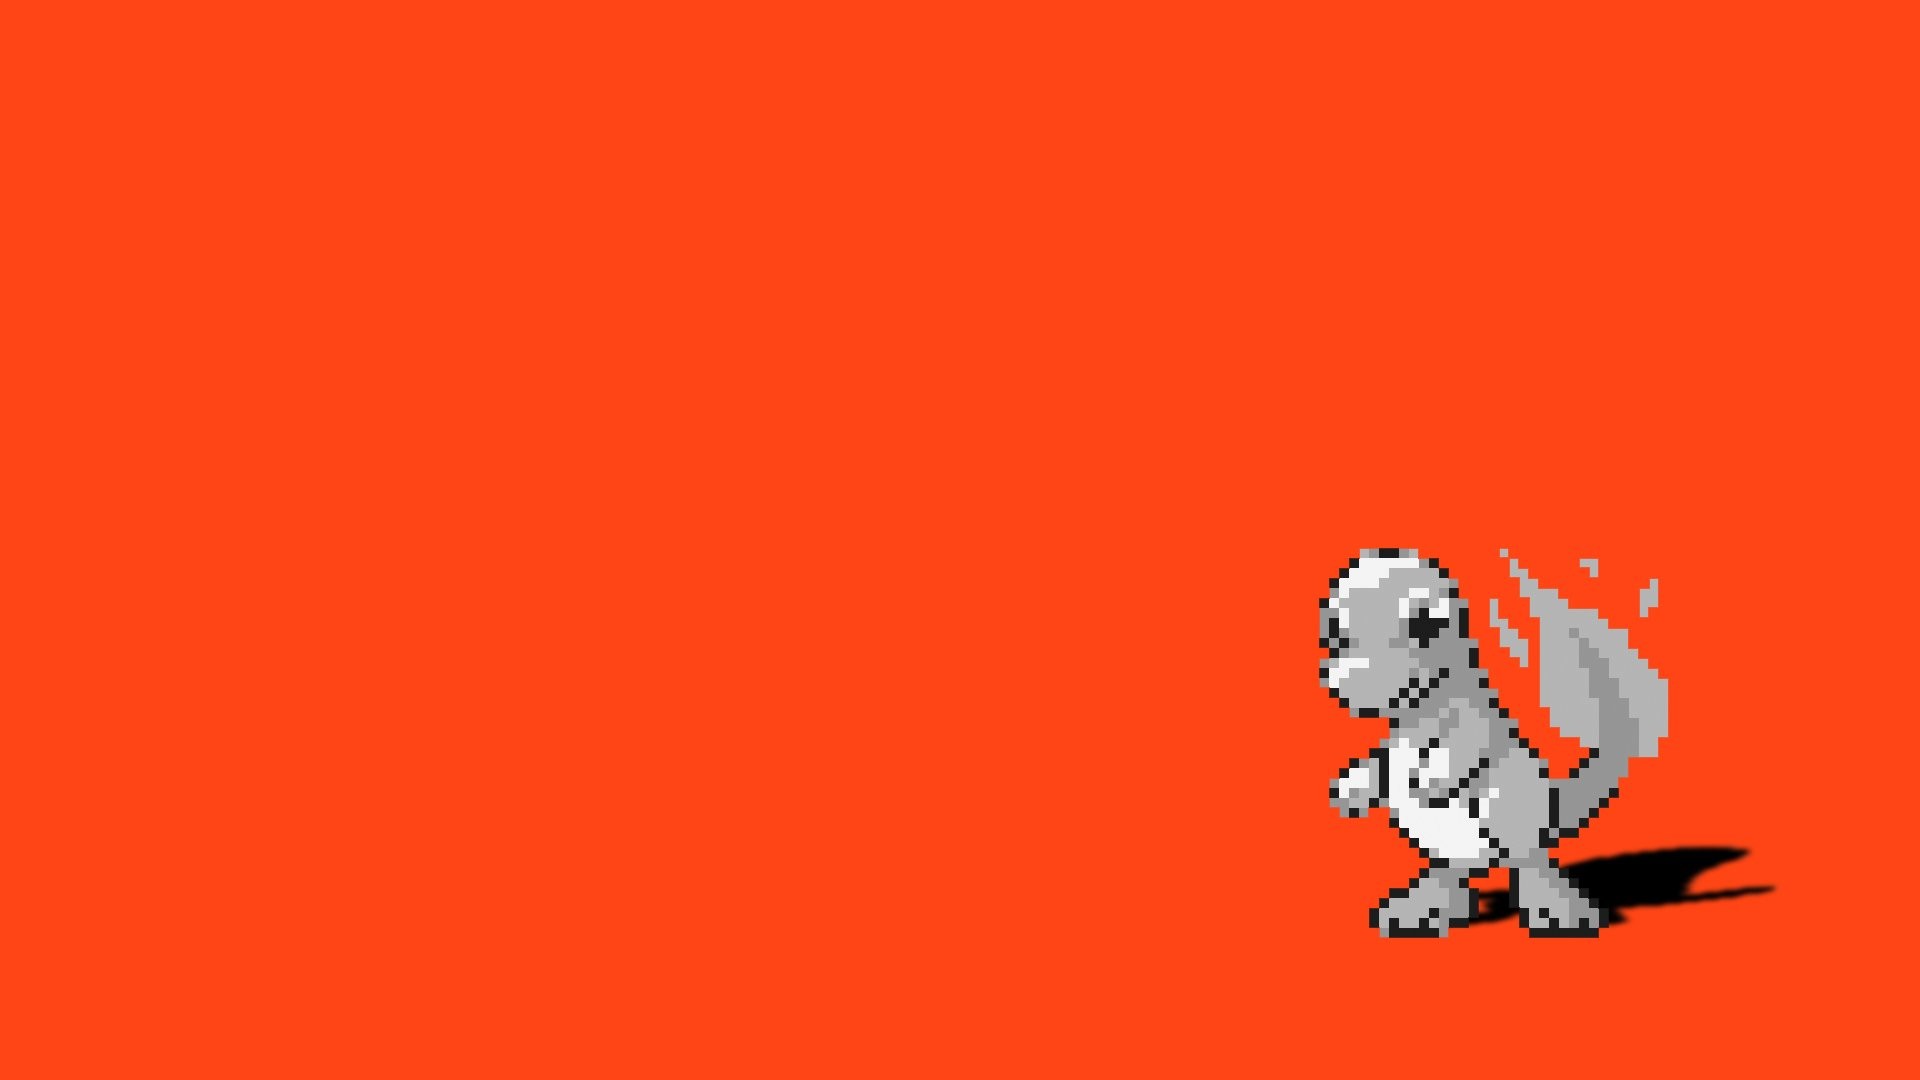 1920x1080 Pokemon simple background Charmander red background wallpaper |  |  254361 | WallpaperUP